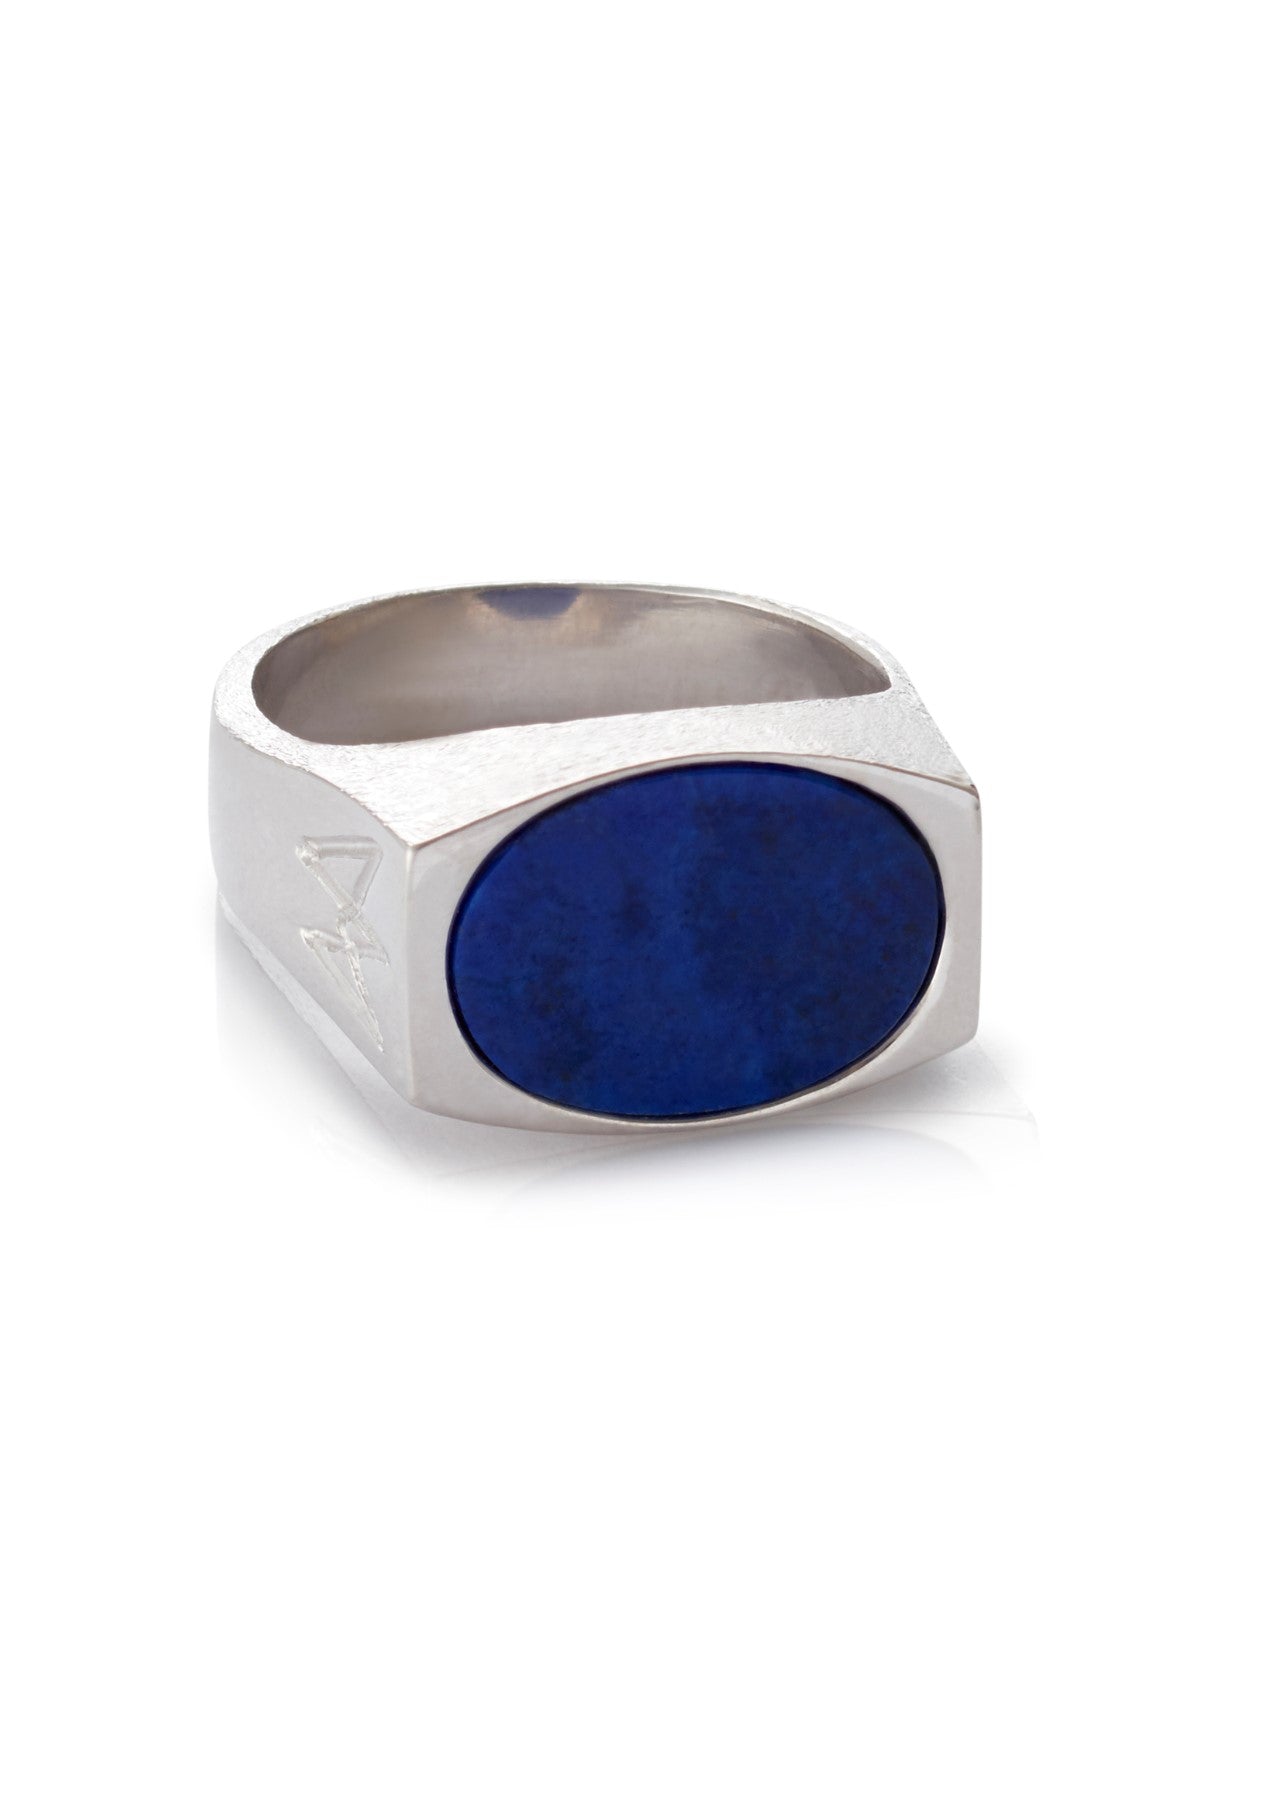 Unisex ring with lapis in silver